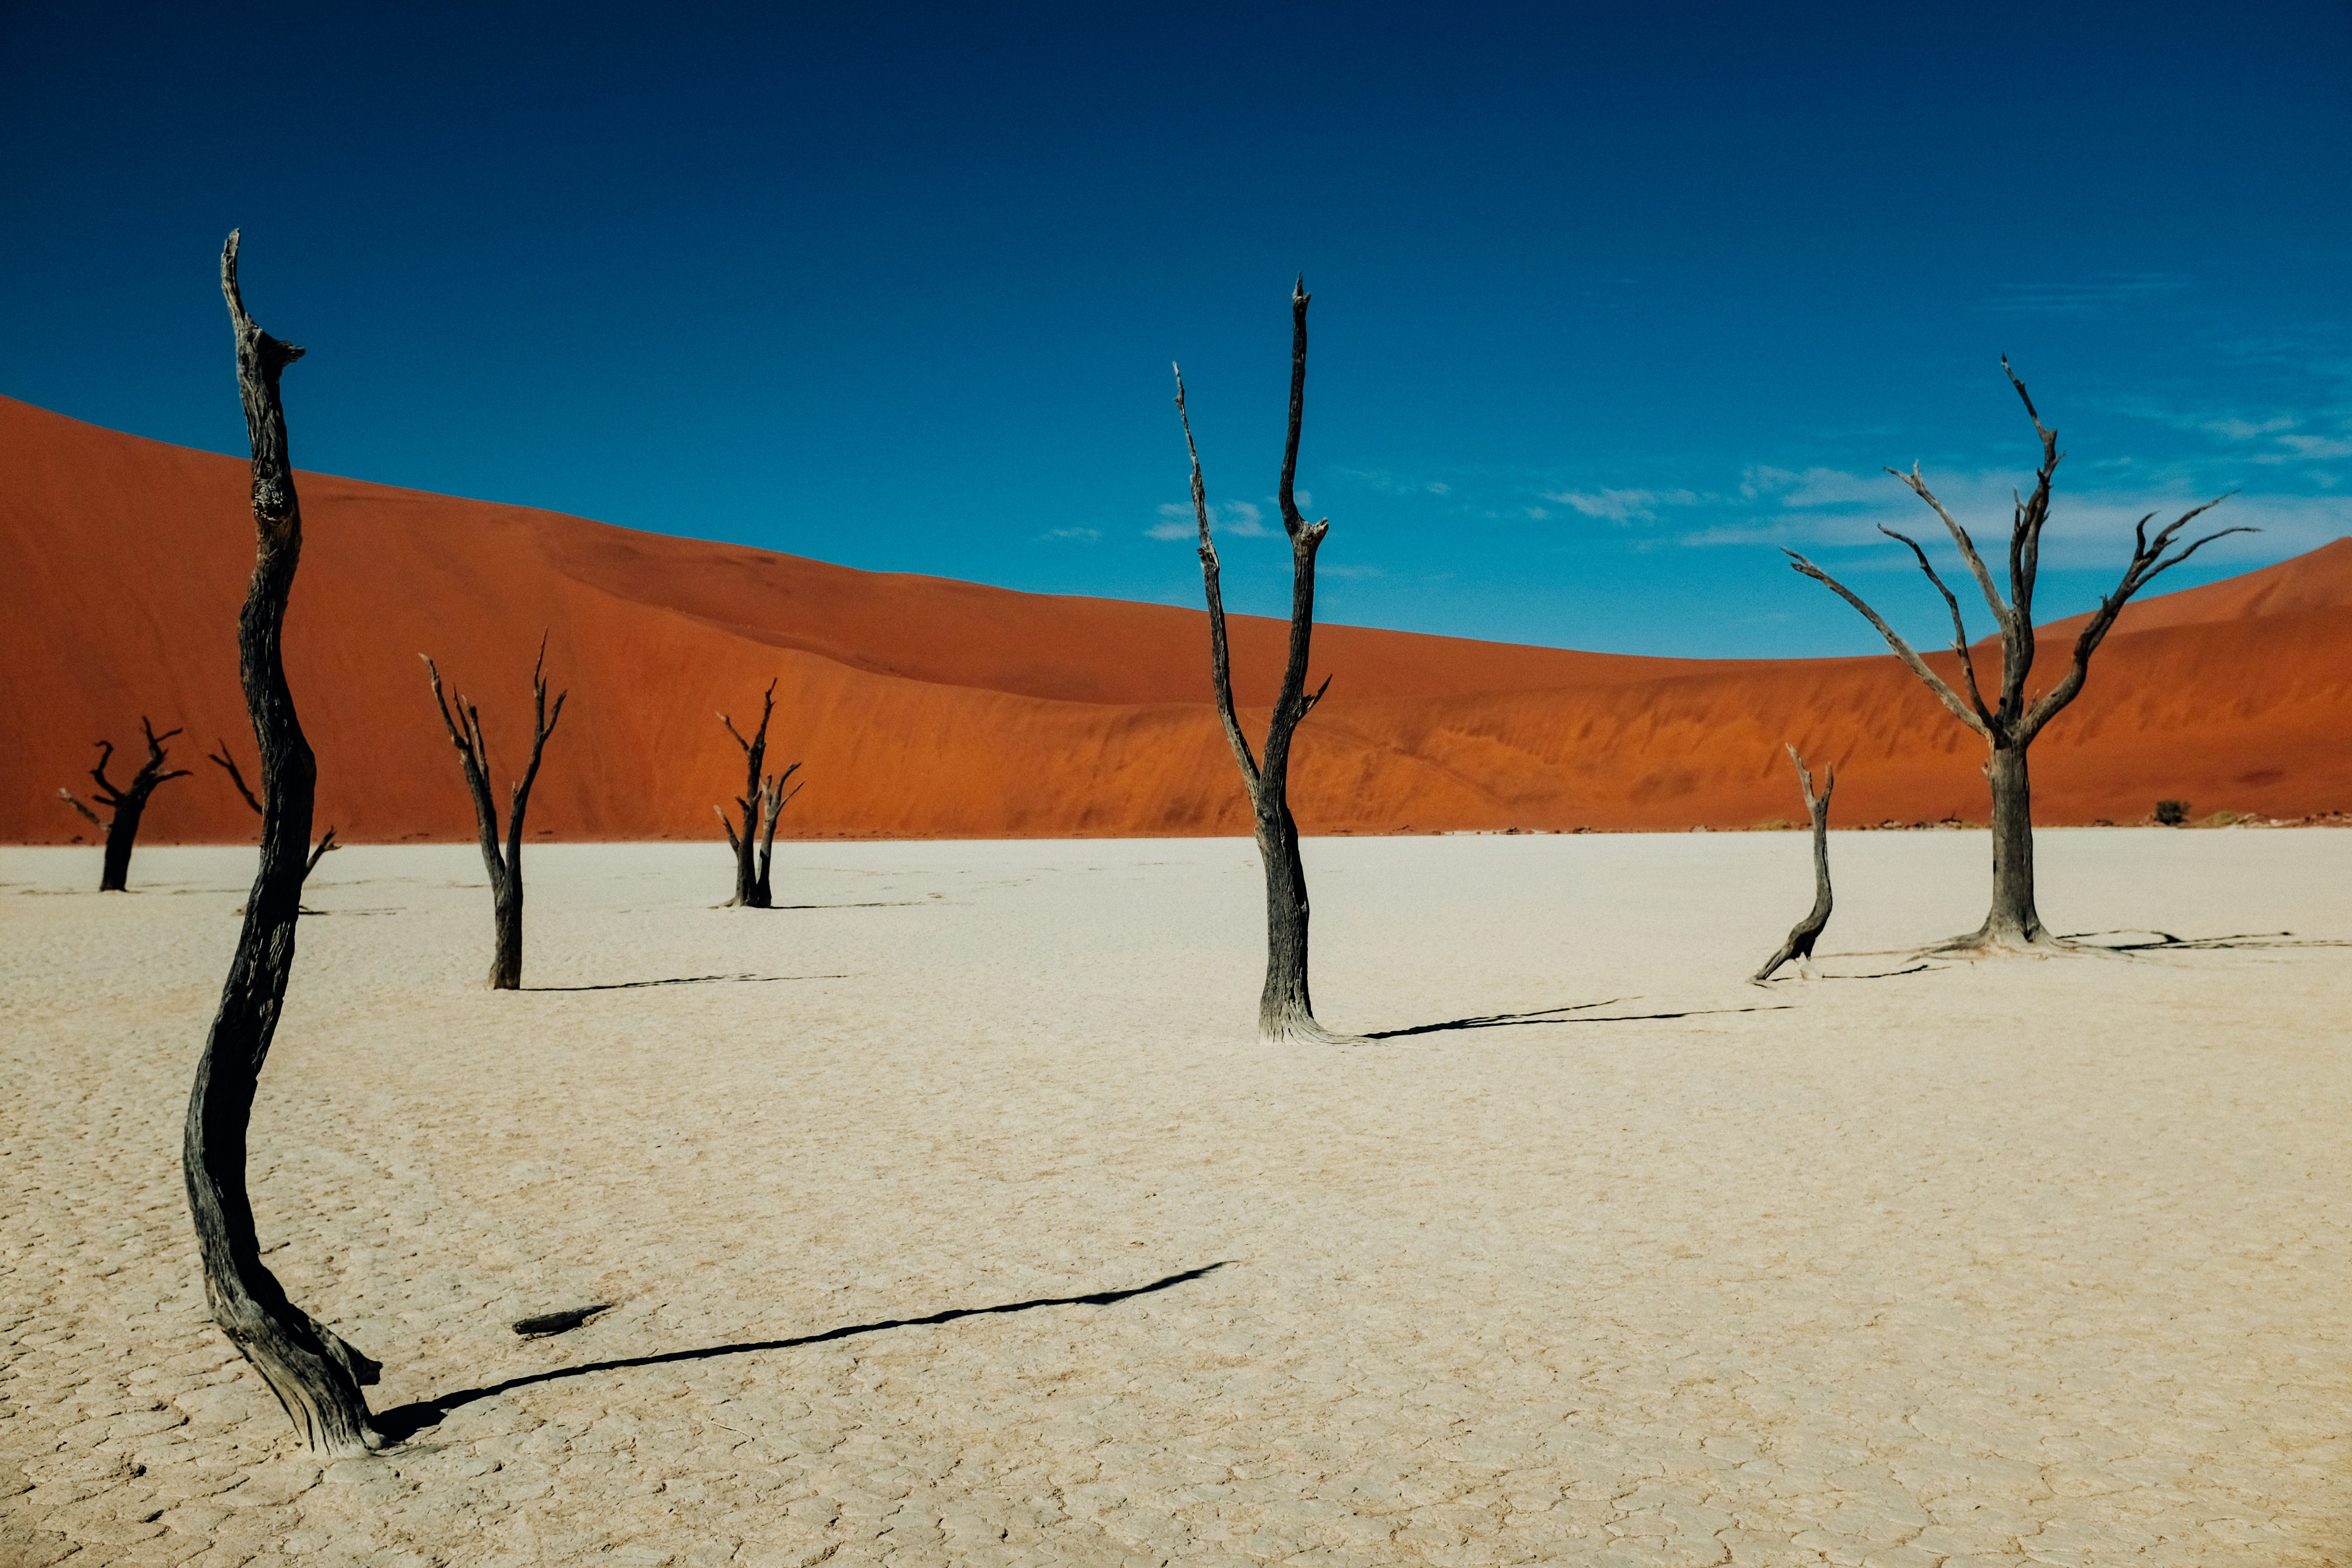 Dark, barren tree trunks in dry sandy-coloured soil. There is a rusty red mountain and a bright blue sky in the background.